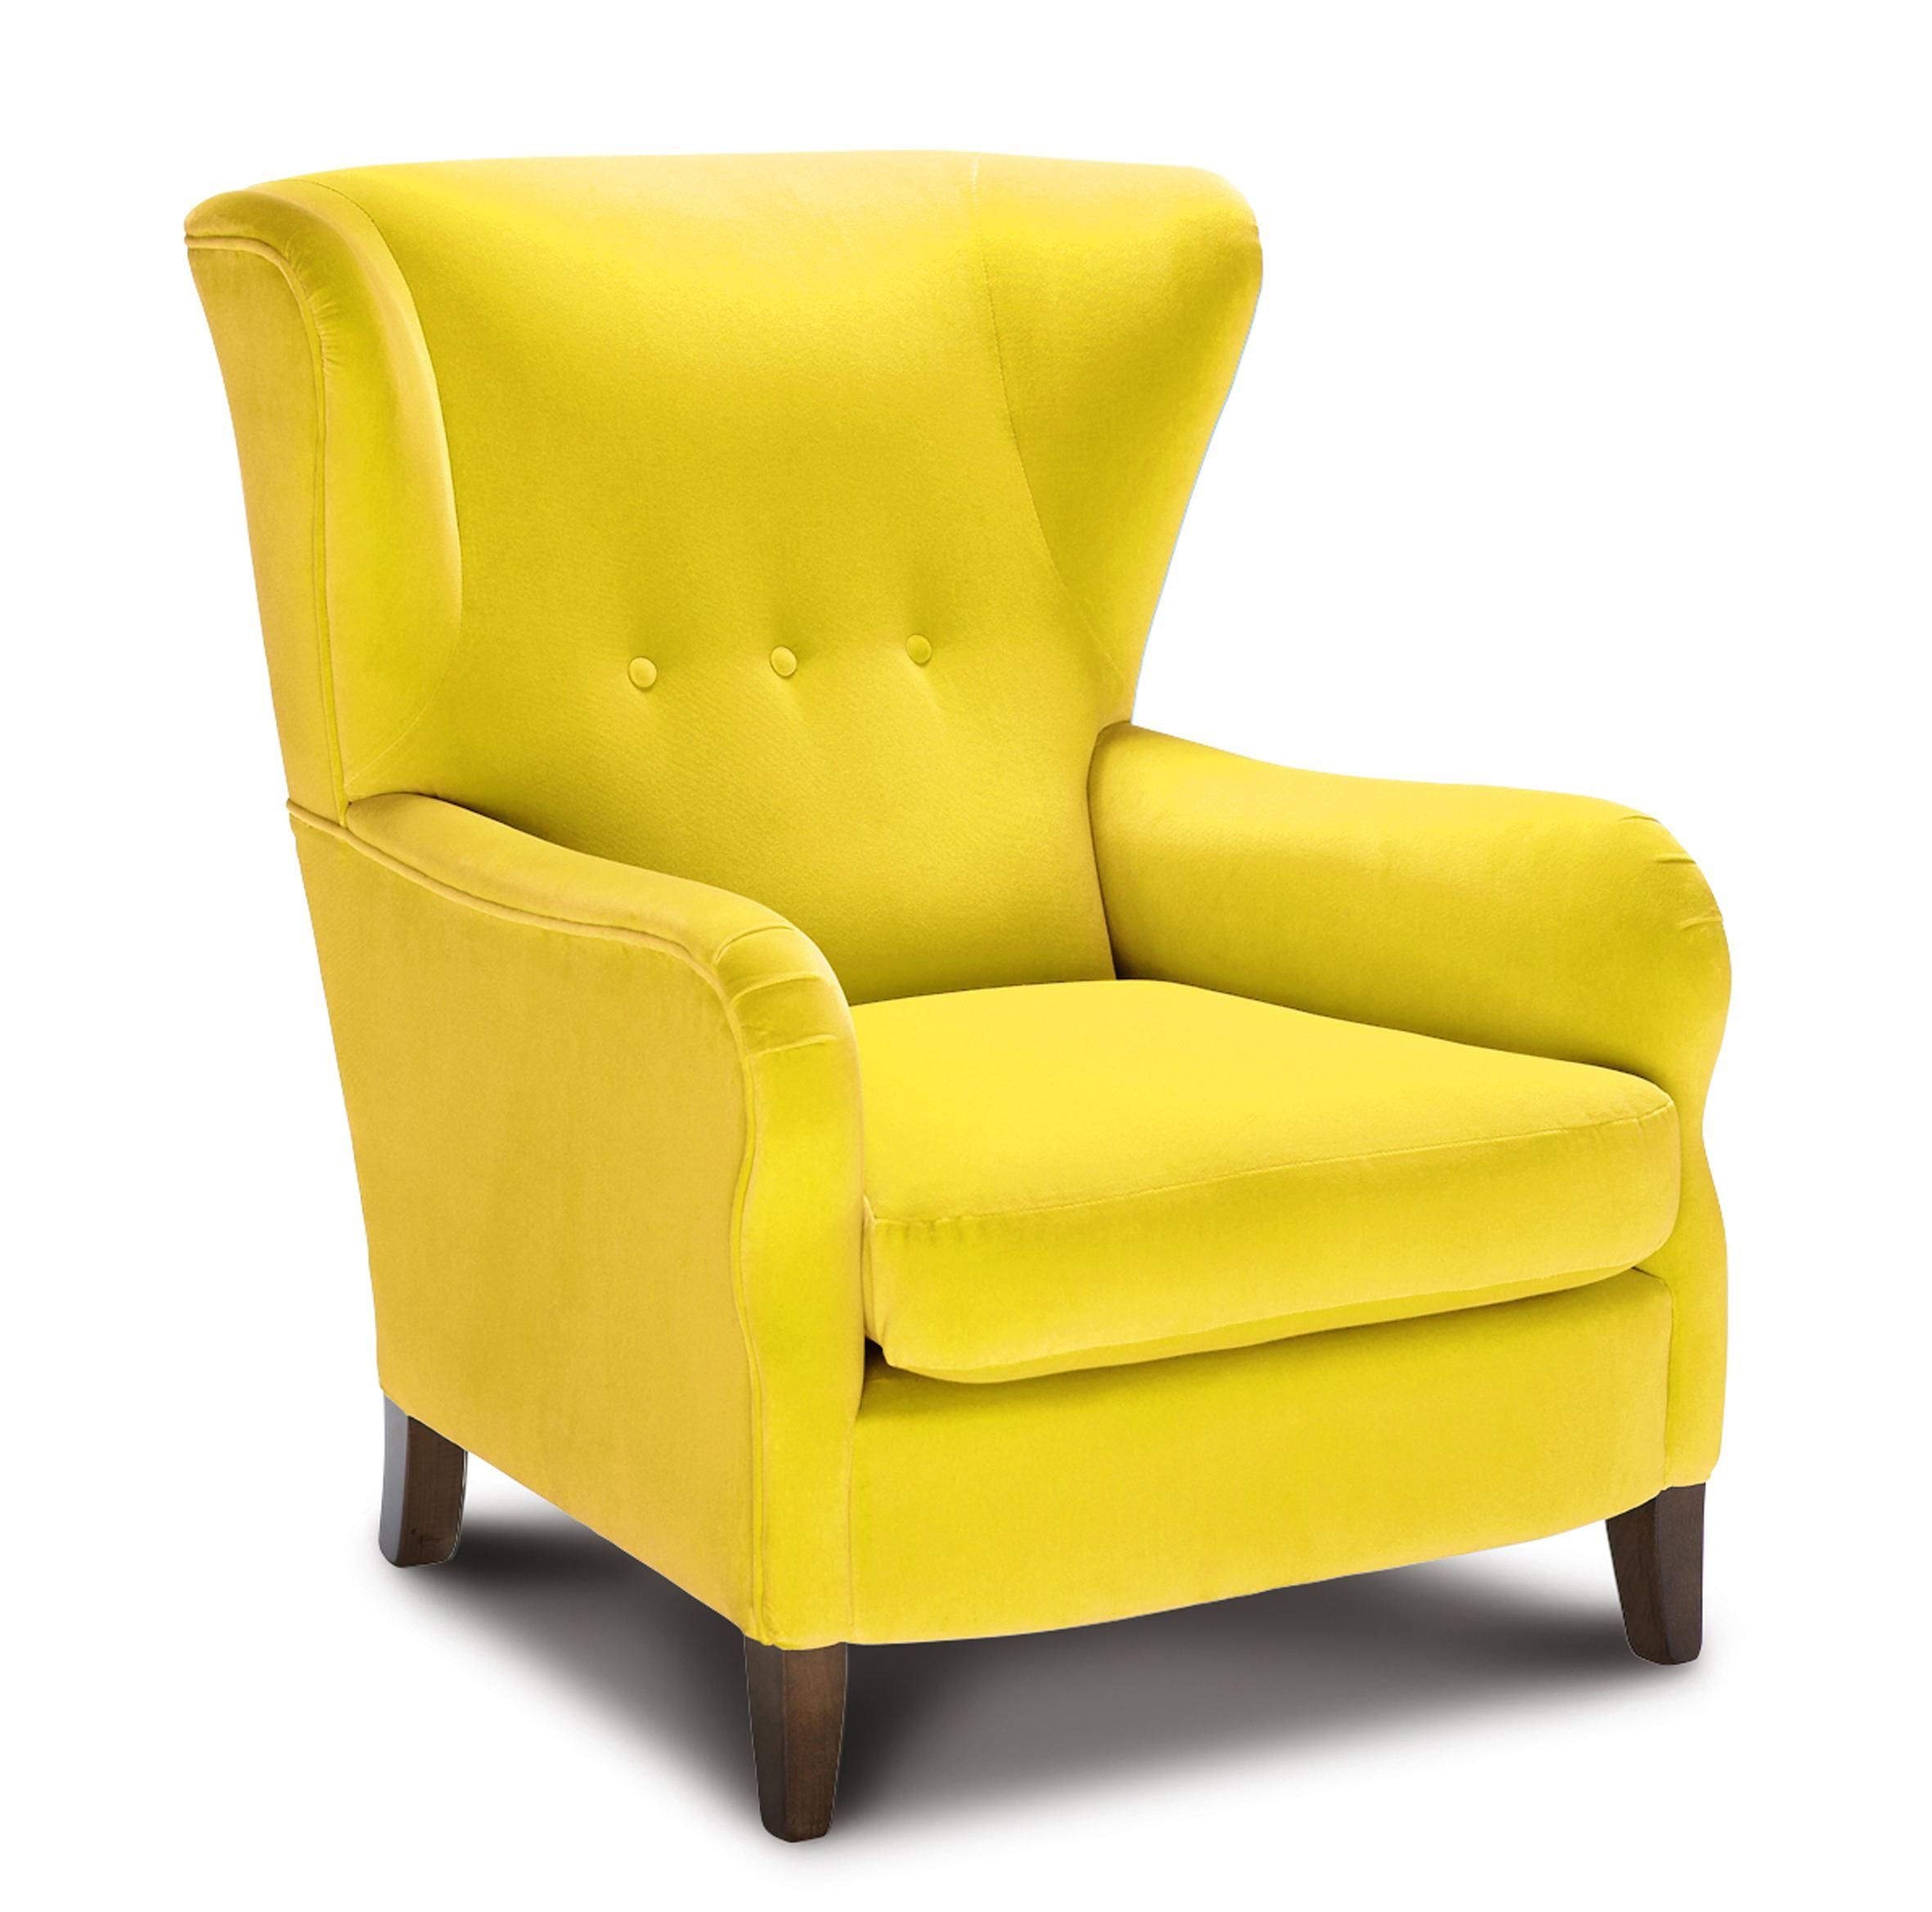 Contemporary Sofa Chairs Design O Intended Decorating Within Yellow Sofa Chairs (View 1 of 20)